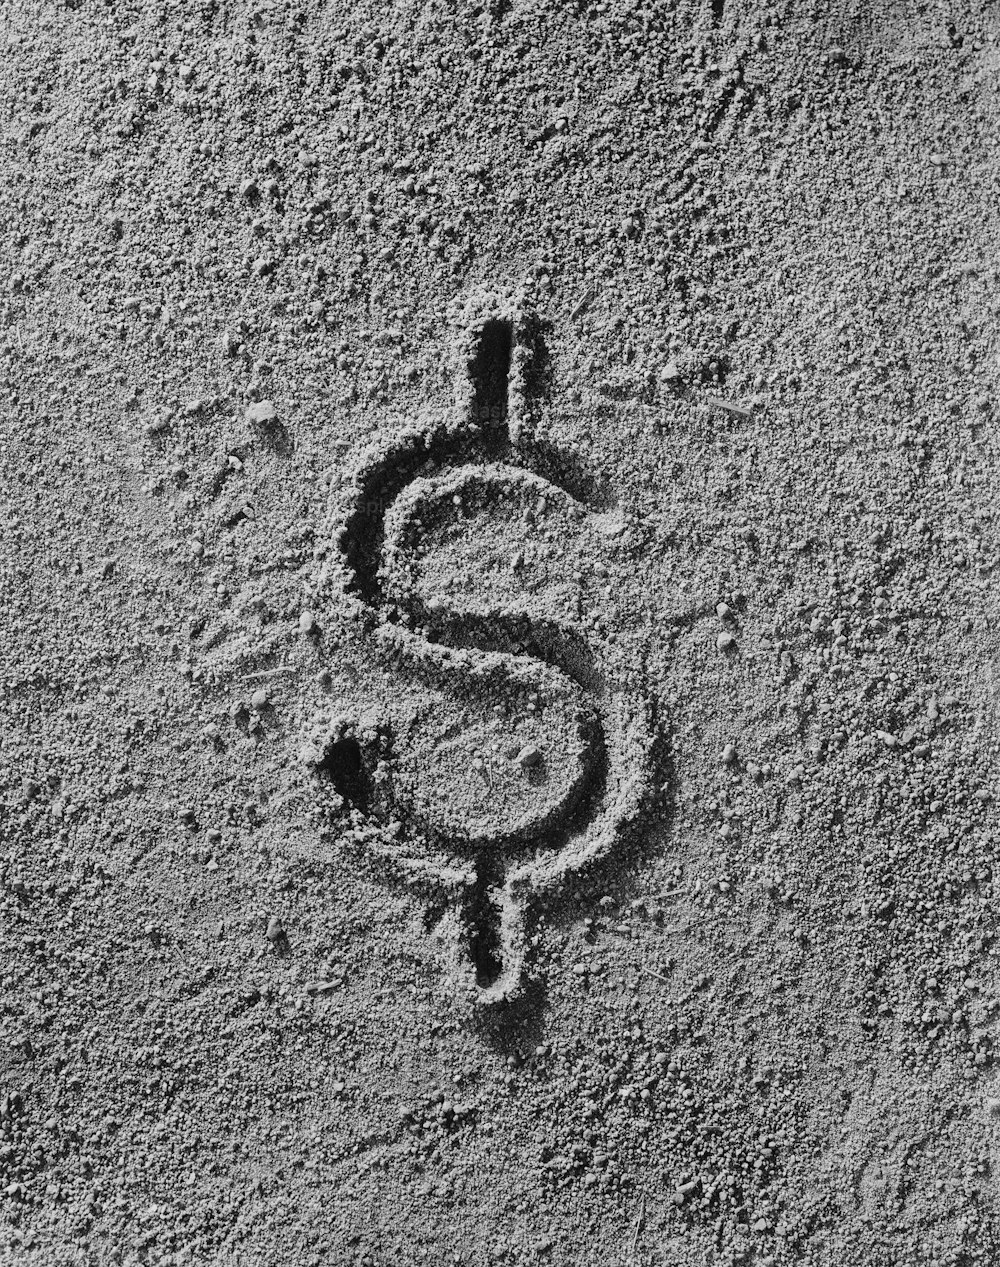 a dollar sign drawn in the sand on the beach